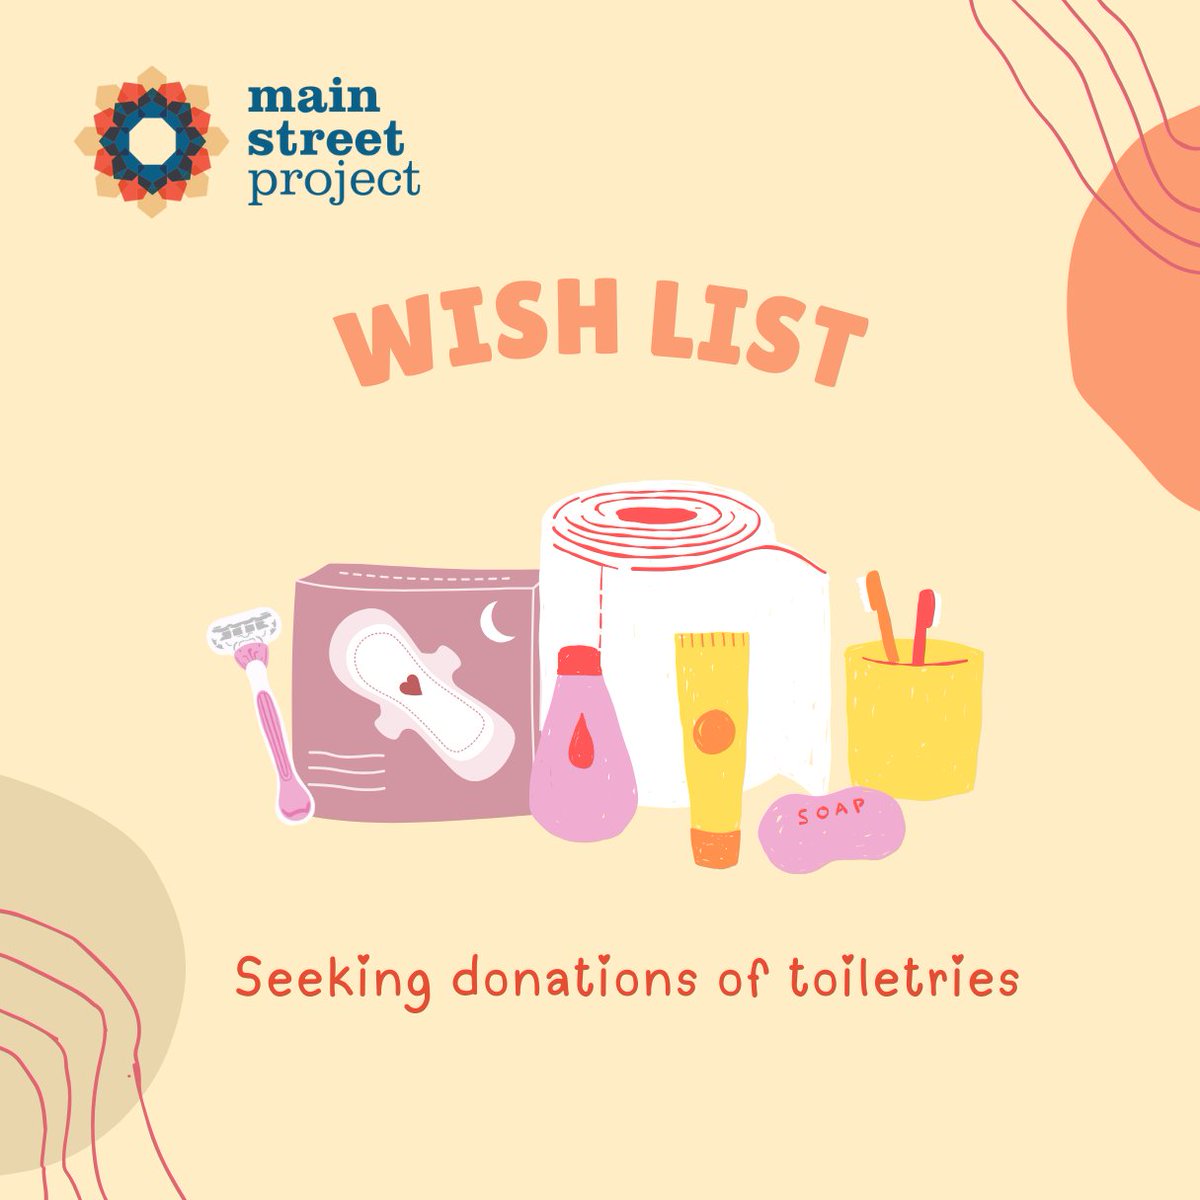 We're collecting donations of new, unopened toiletries to distribute to community members. To donate, shop our Amazon wish list and your donations will be mailed directly to us: ow.ly/c2lU50Rowvc Thank you for your support! #MSPBuildingStability #Winnipeg #Manitoba